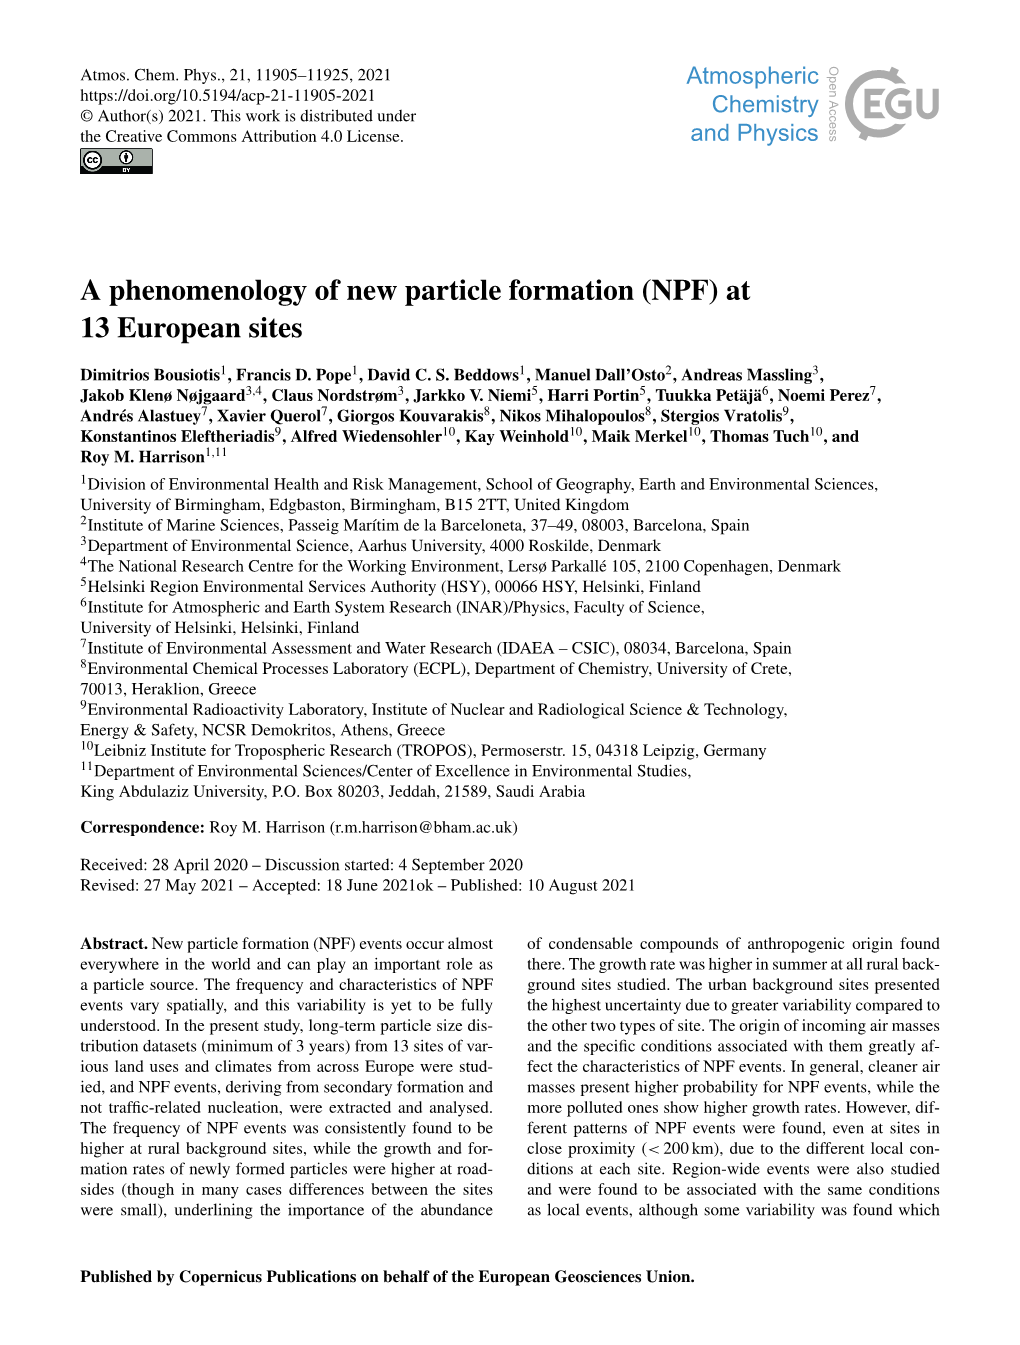 Article Formation (NPF) at 13 European Sites